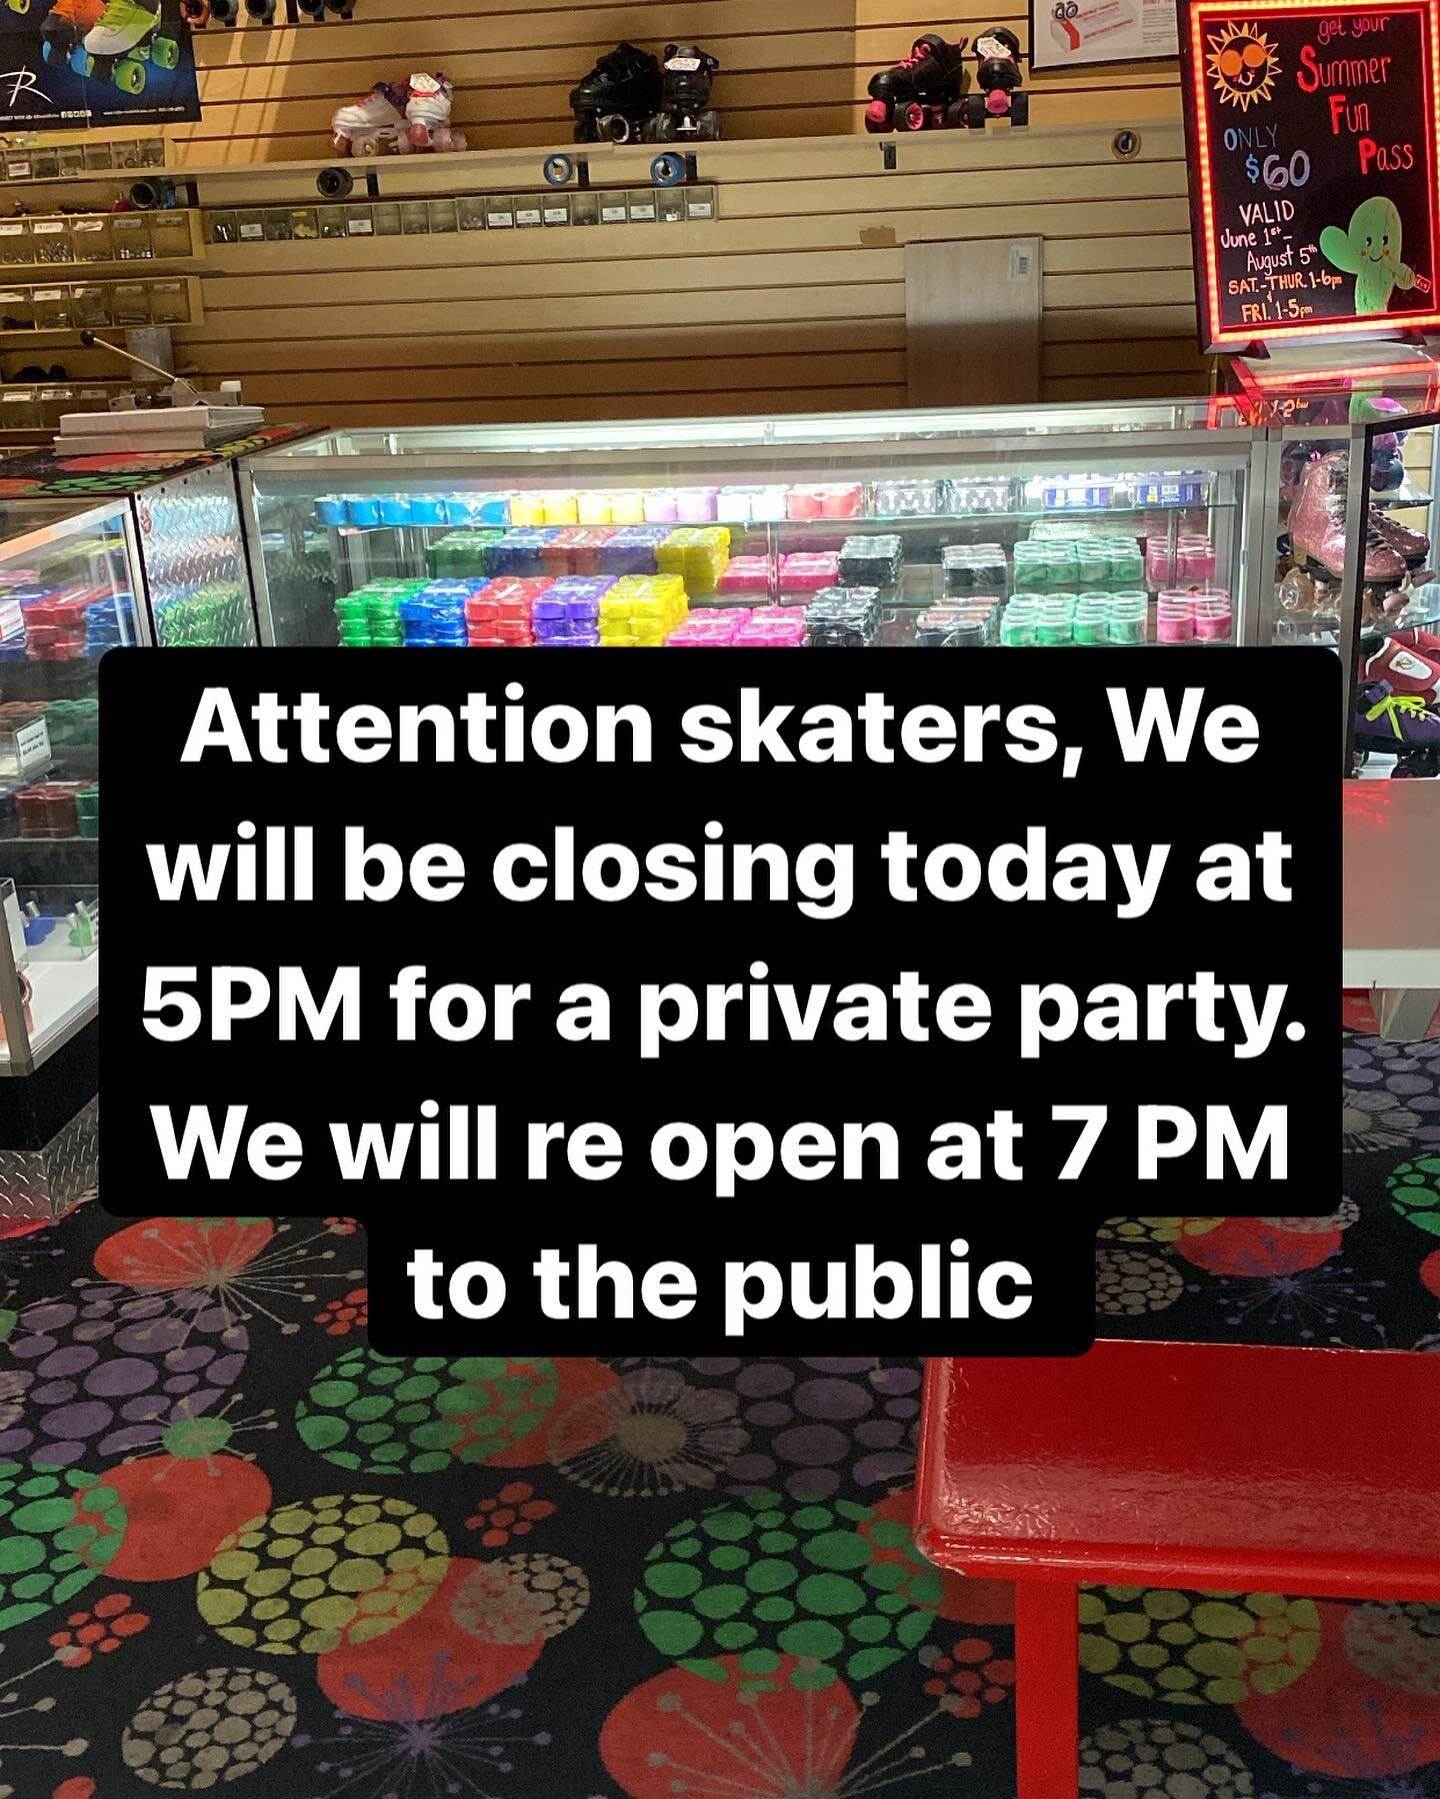 Heads up everyone! We will be closing today 7/15, at 5PM. We will reopen at 7PM to the public